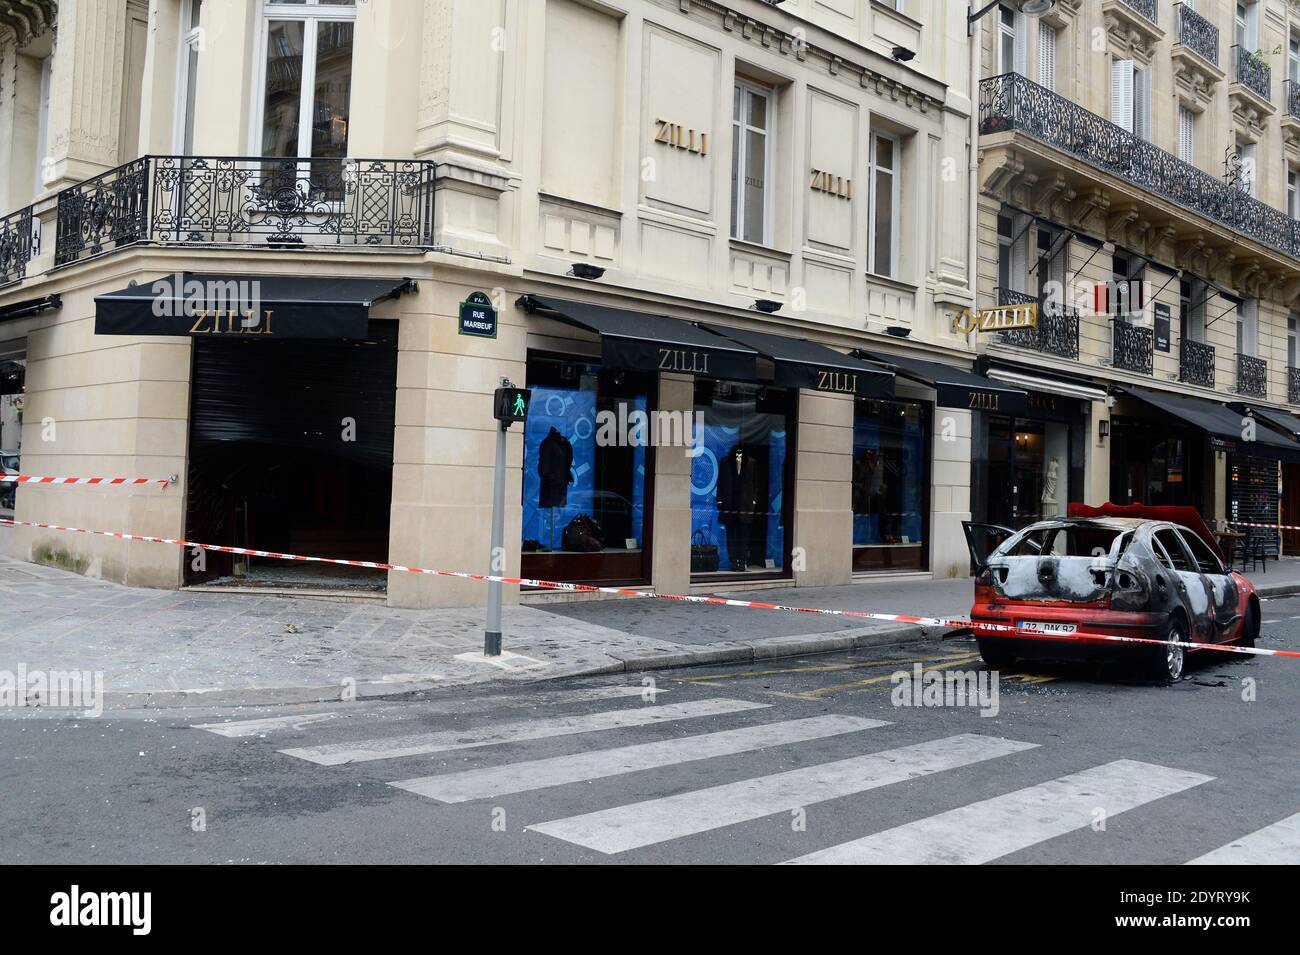 A burnt-out car stands in front of luxury clothing store Zilli in Paris,  France on August 26, 2013. Thieves set the car on fire after they used it  in the early morning